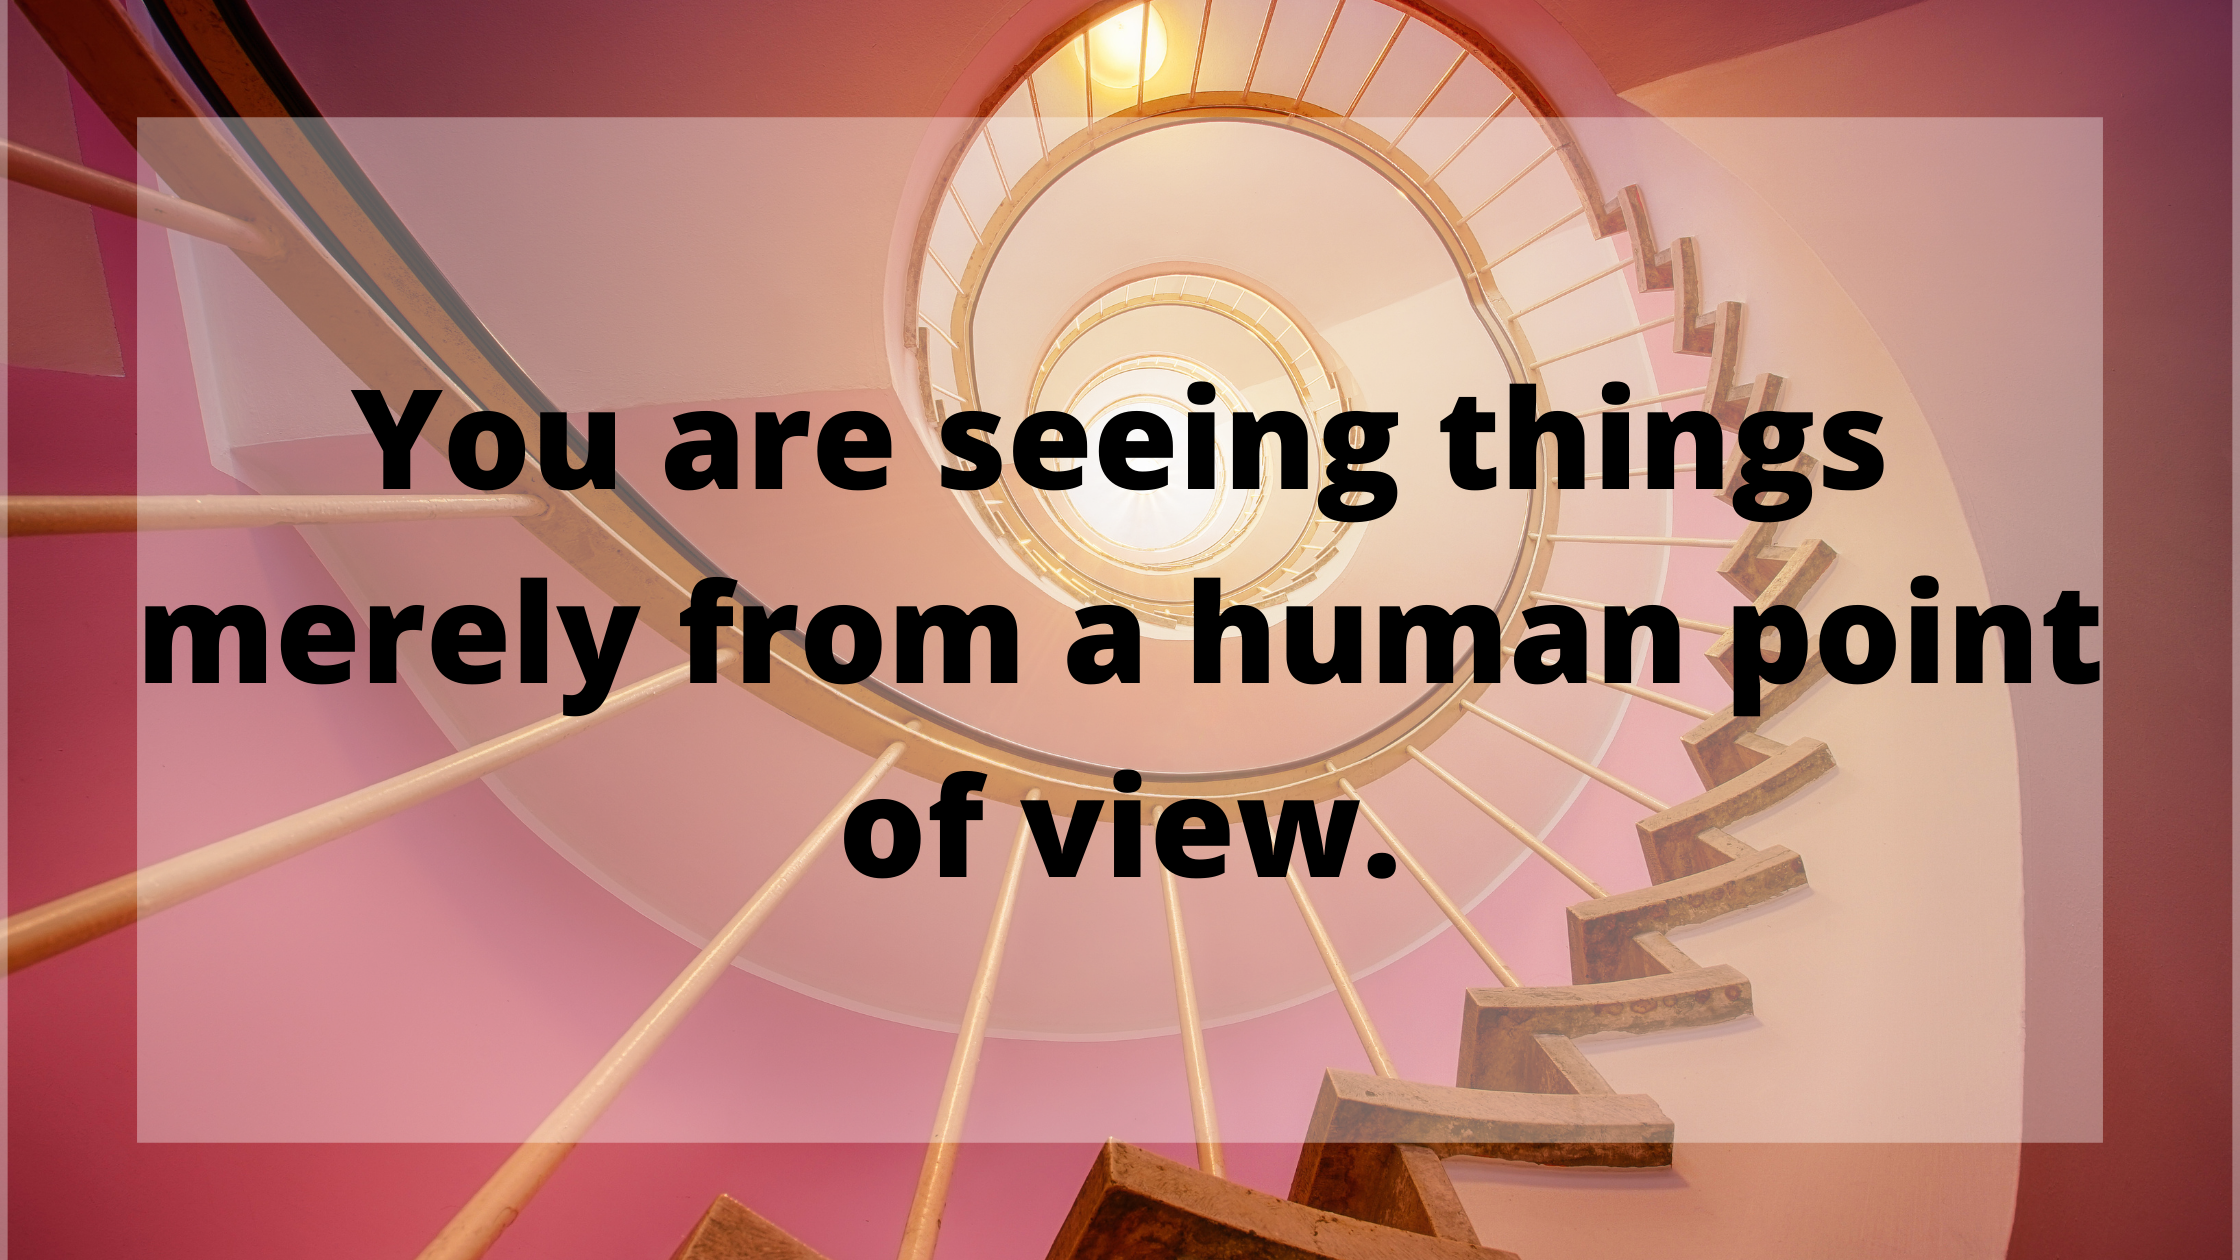 You are seeing things merely from a human point of view.